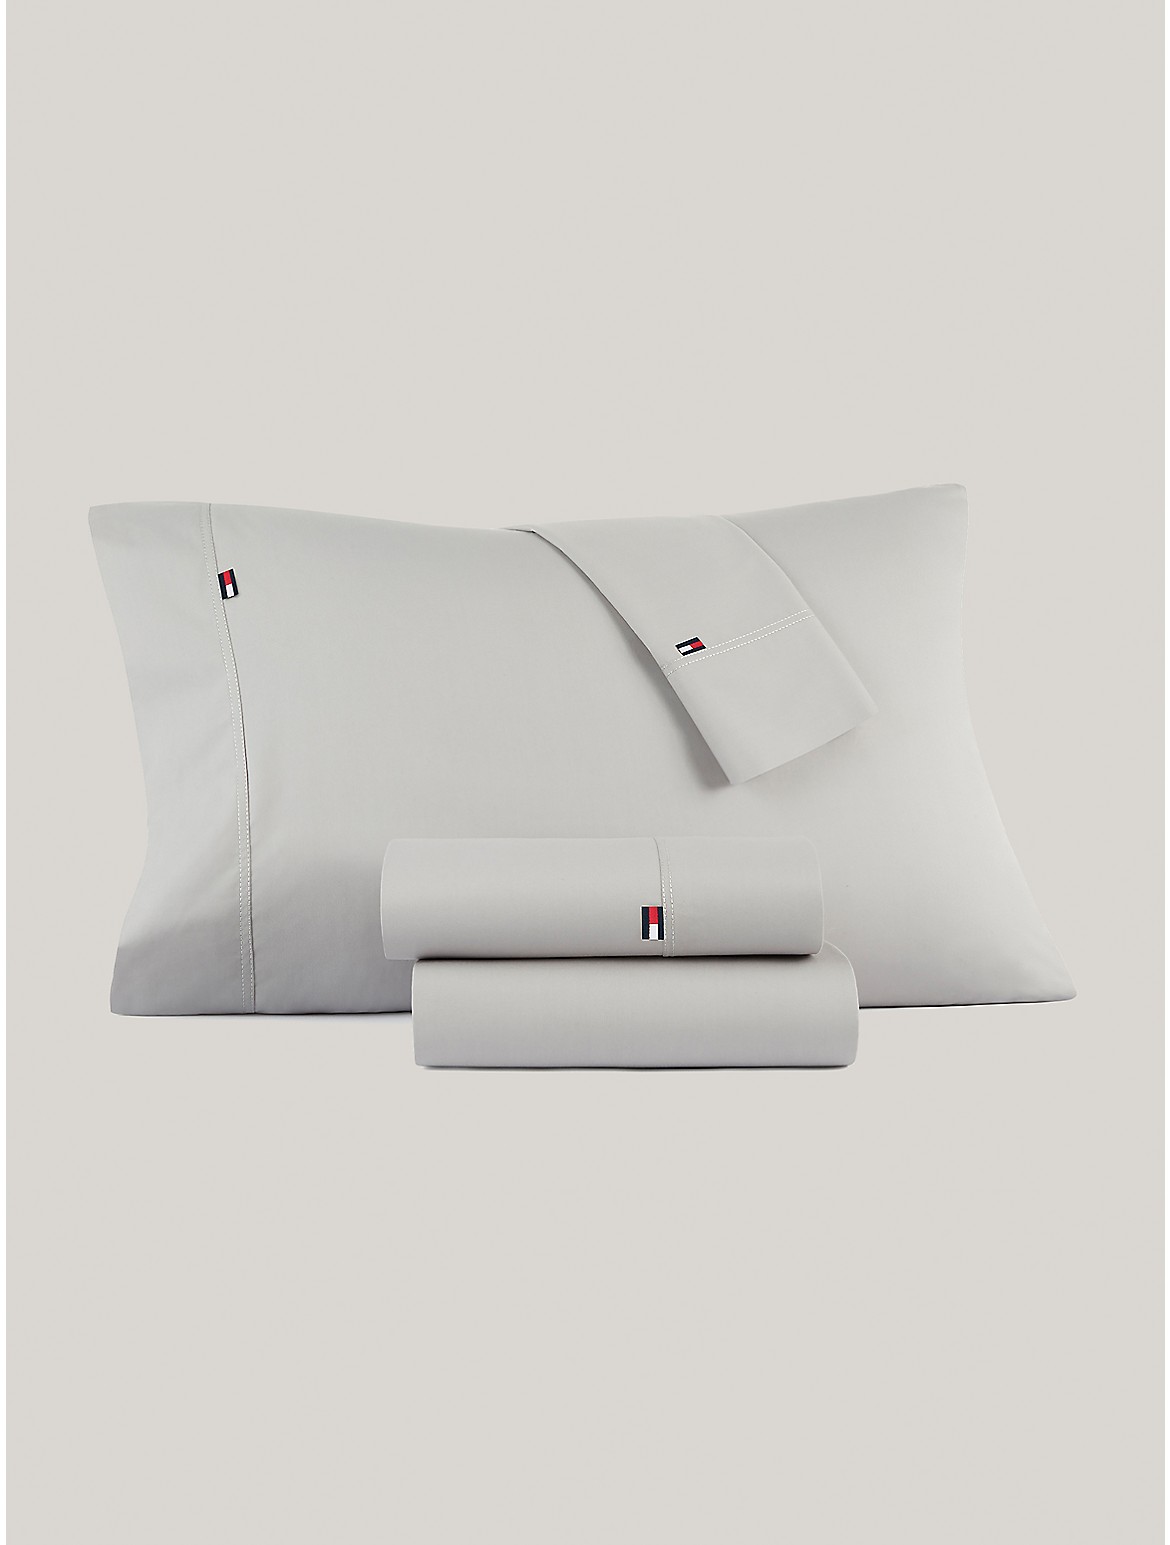 Tommy Hilfiger Signature Solid Gray Pillowcase Set - Grey - QUEEN